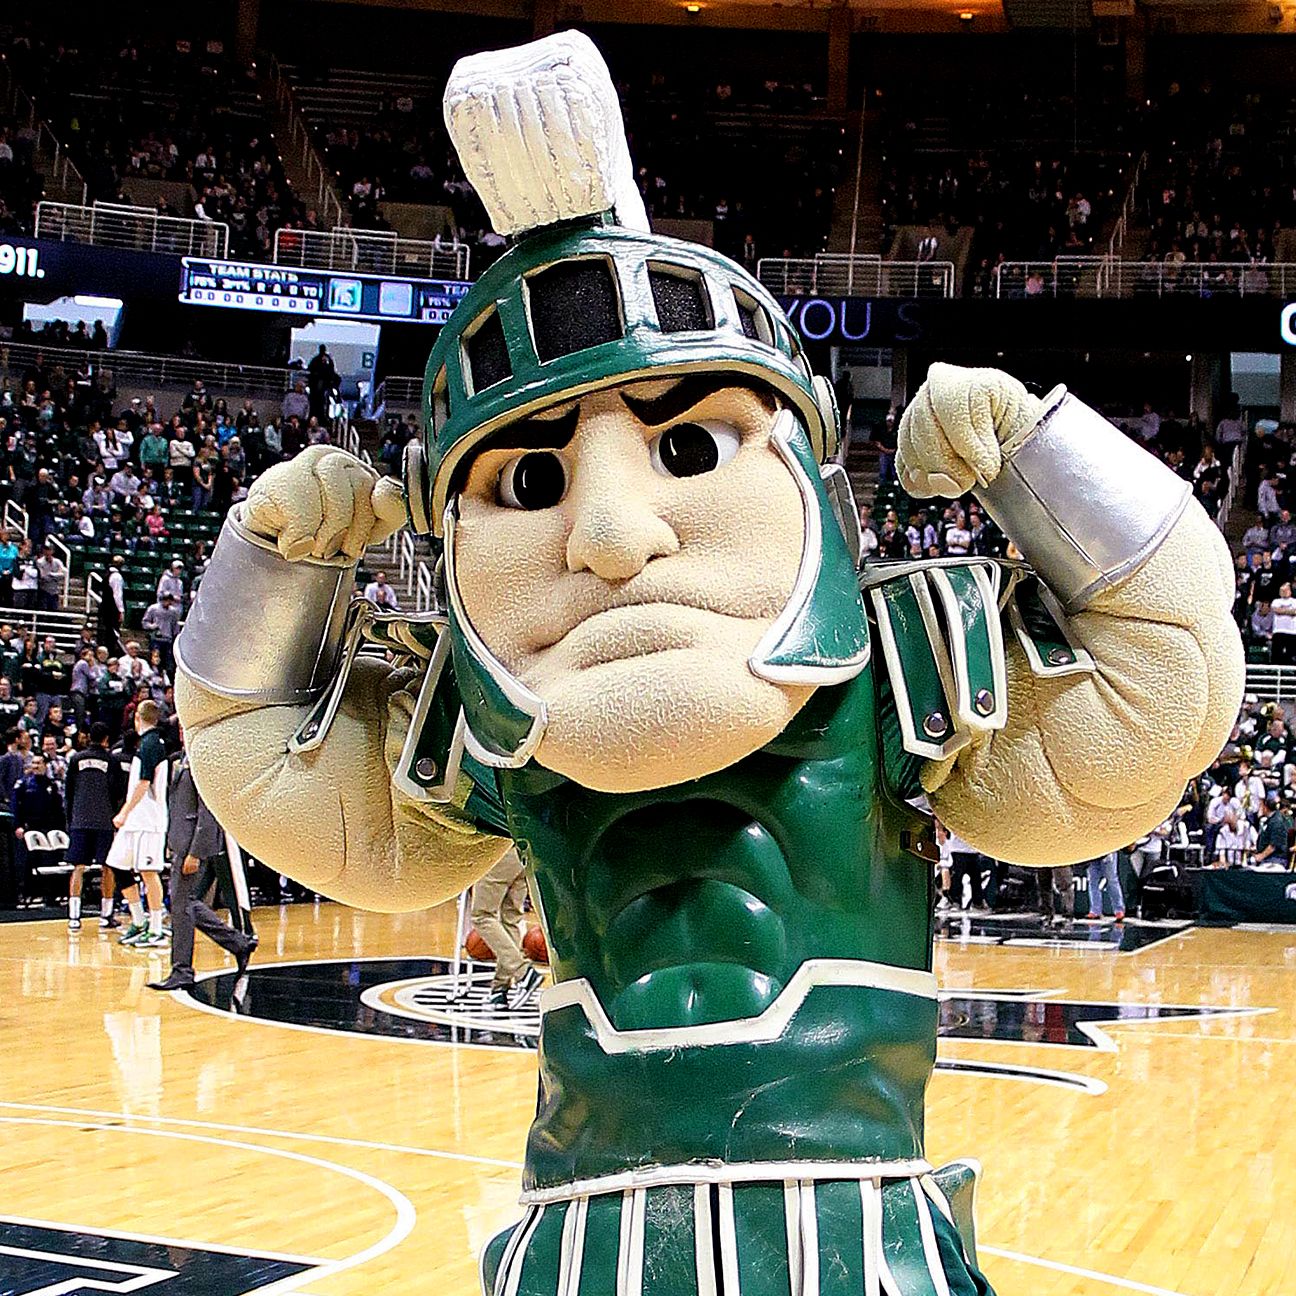 Top 10 mascots in college basketball1296 x 1296